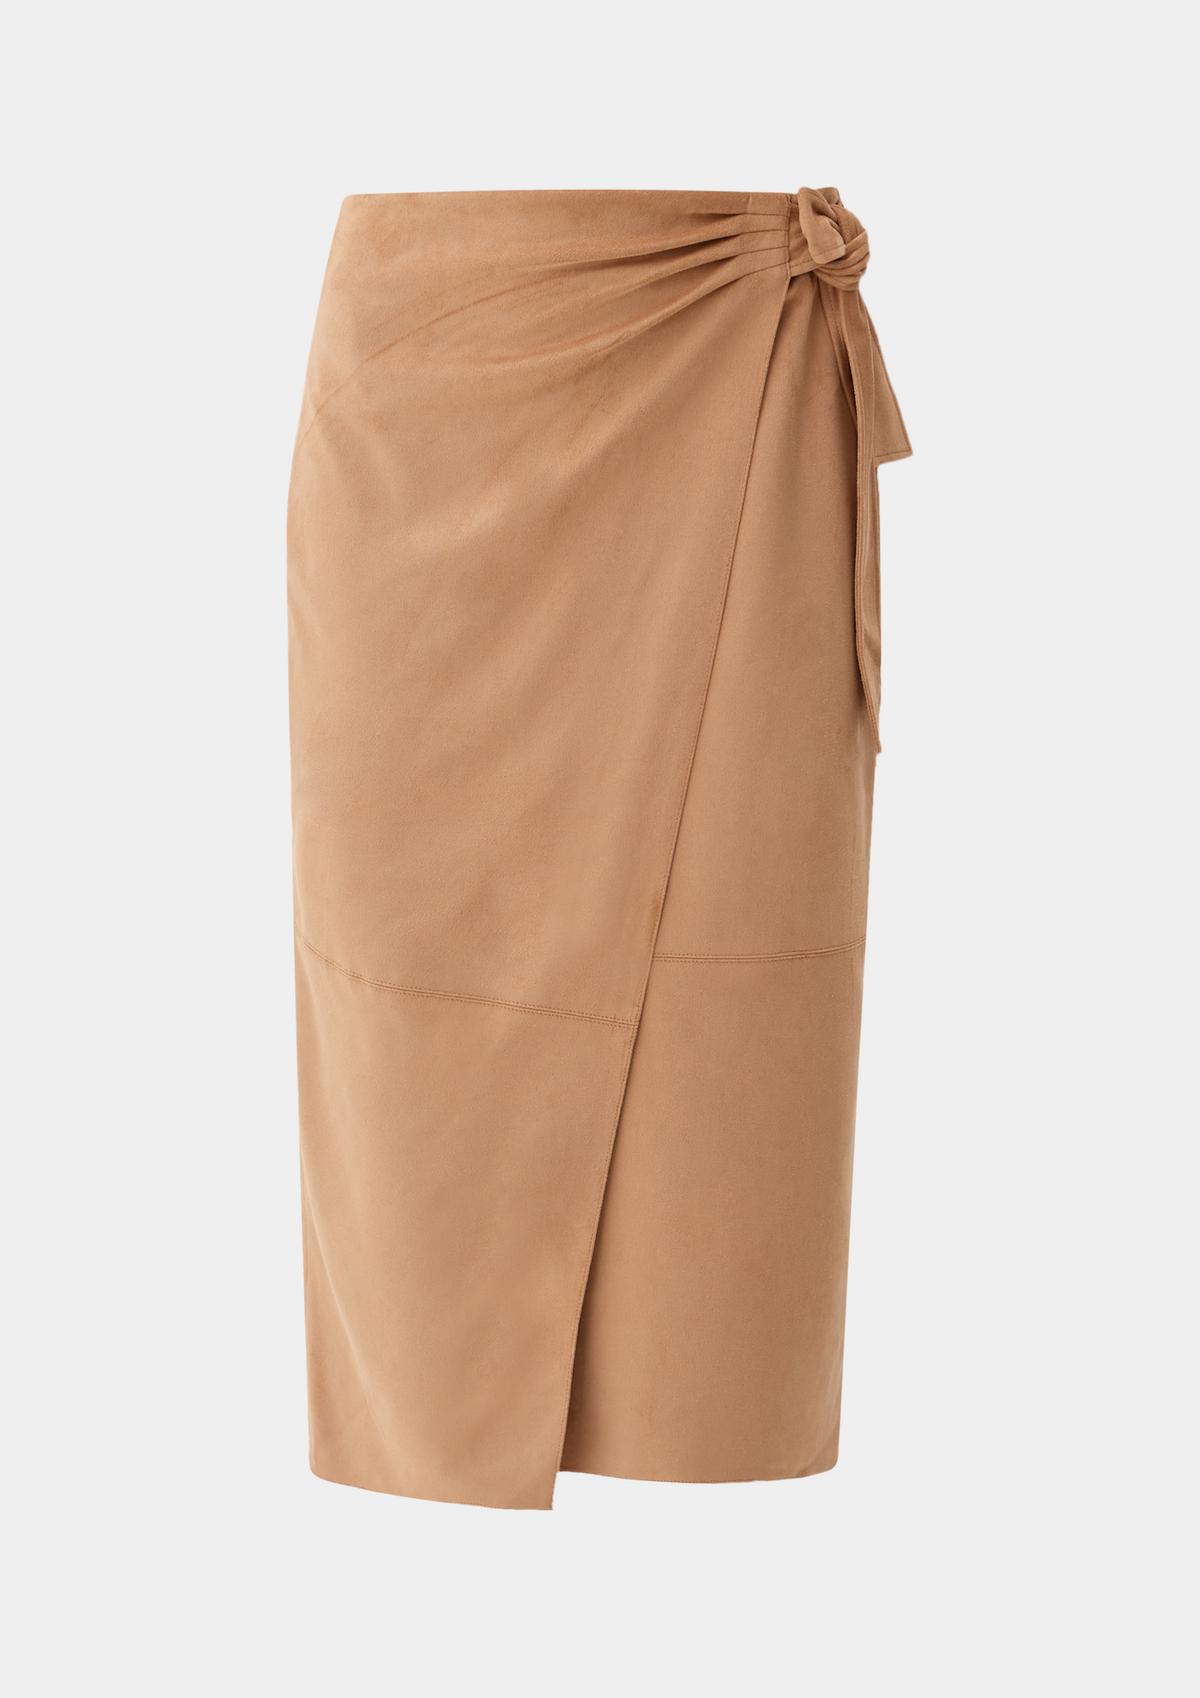 s.Oliver Midi skirt with a suede texture